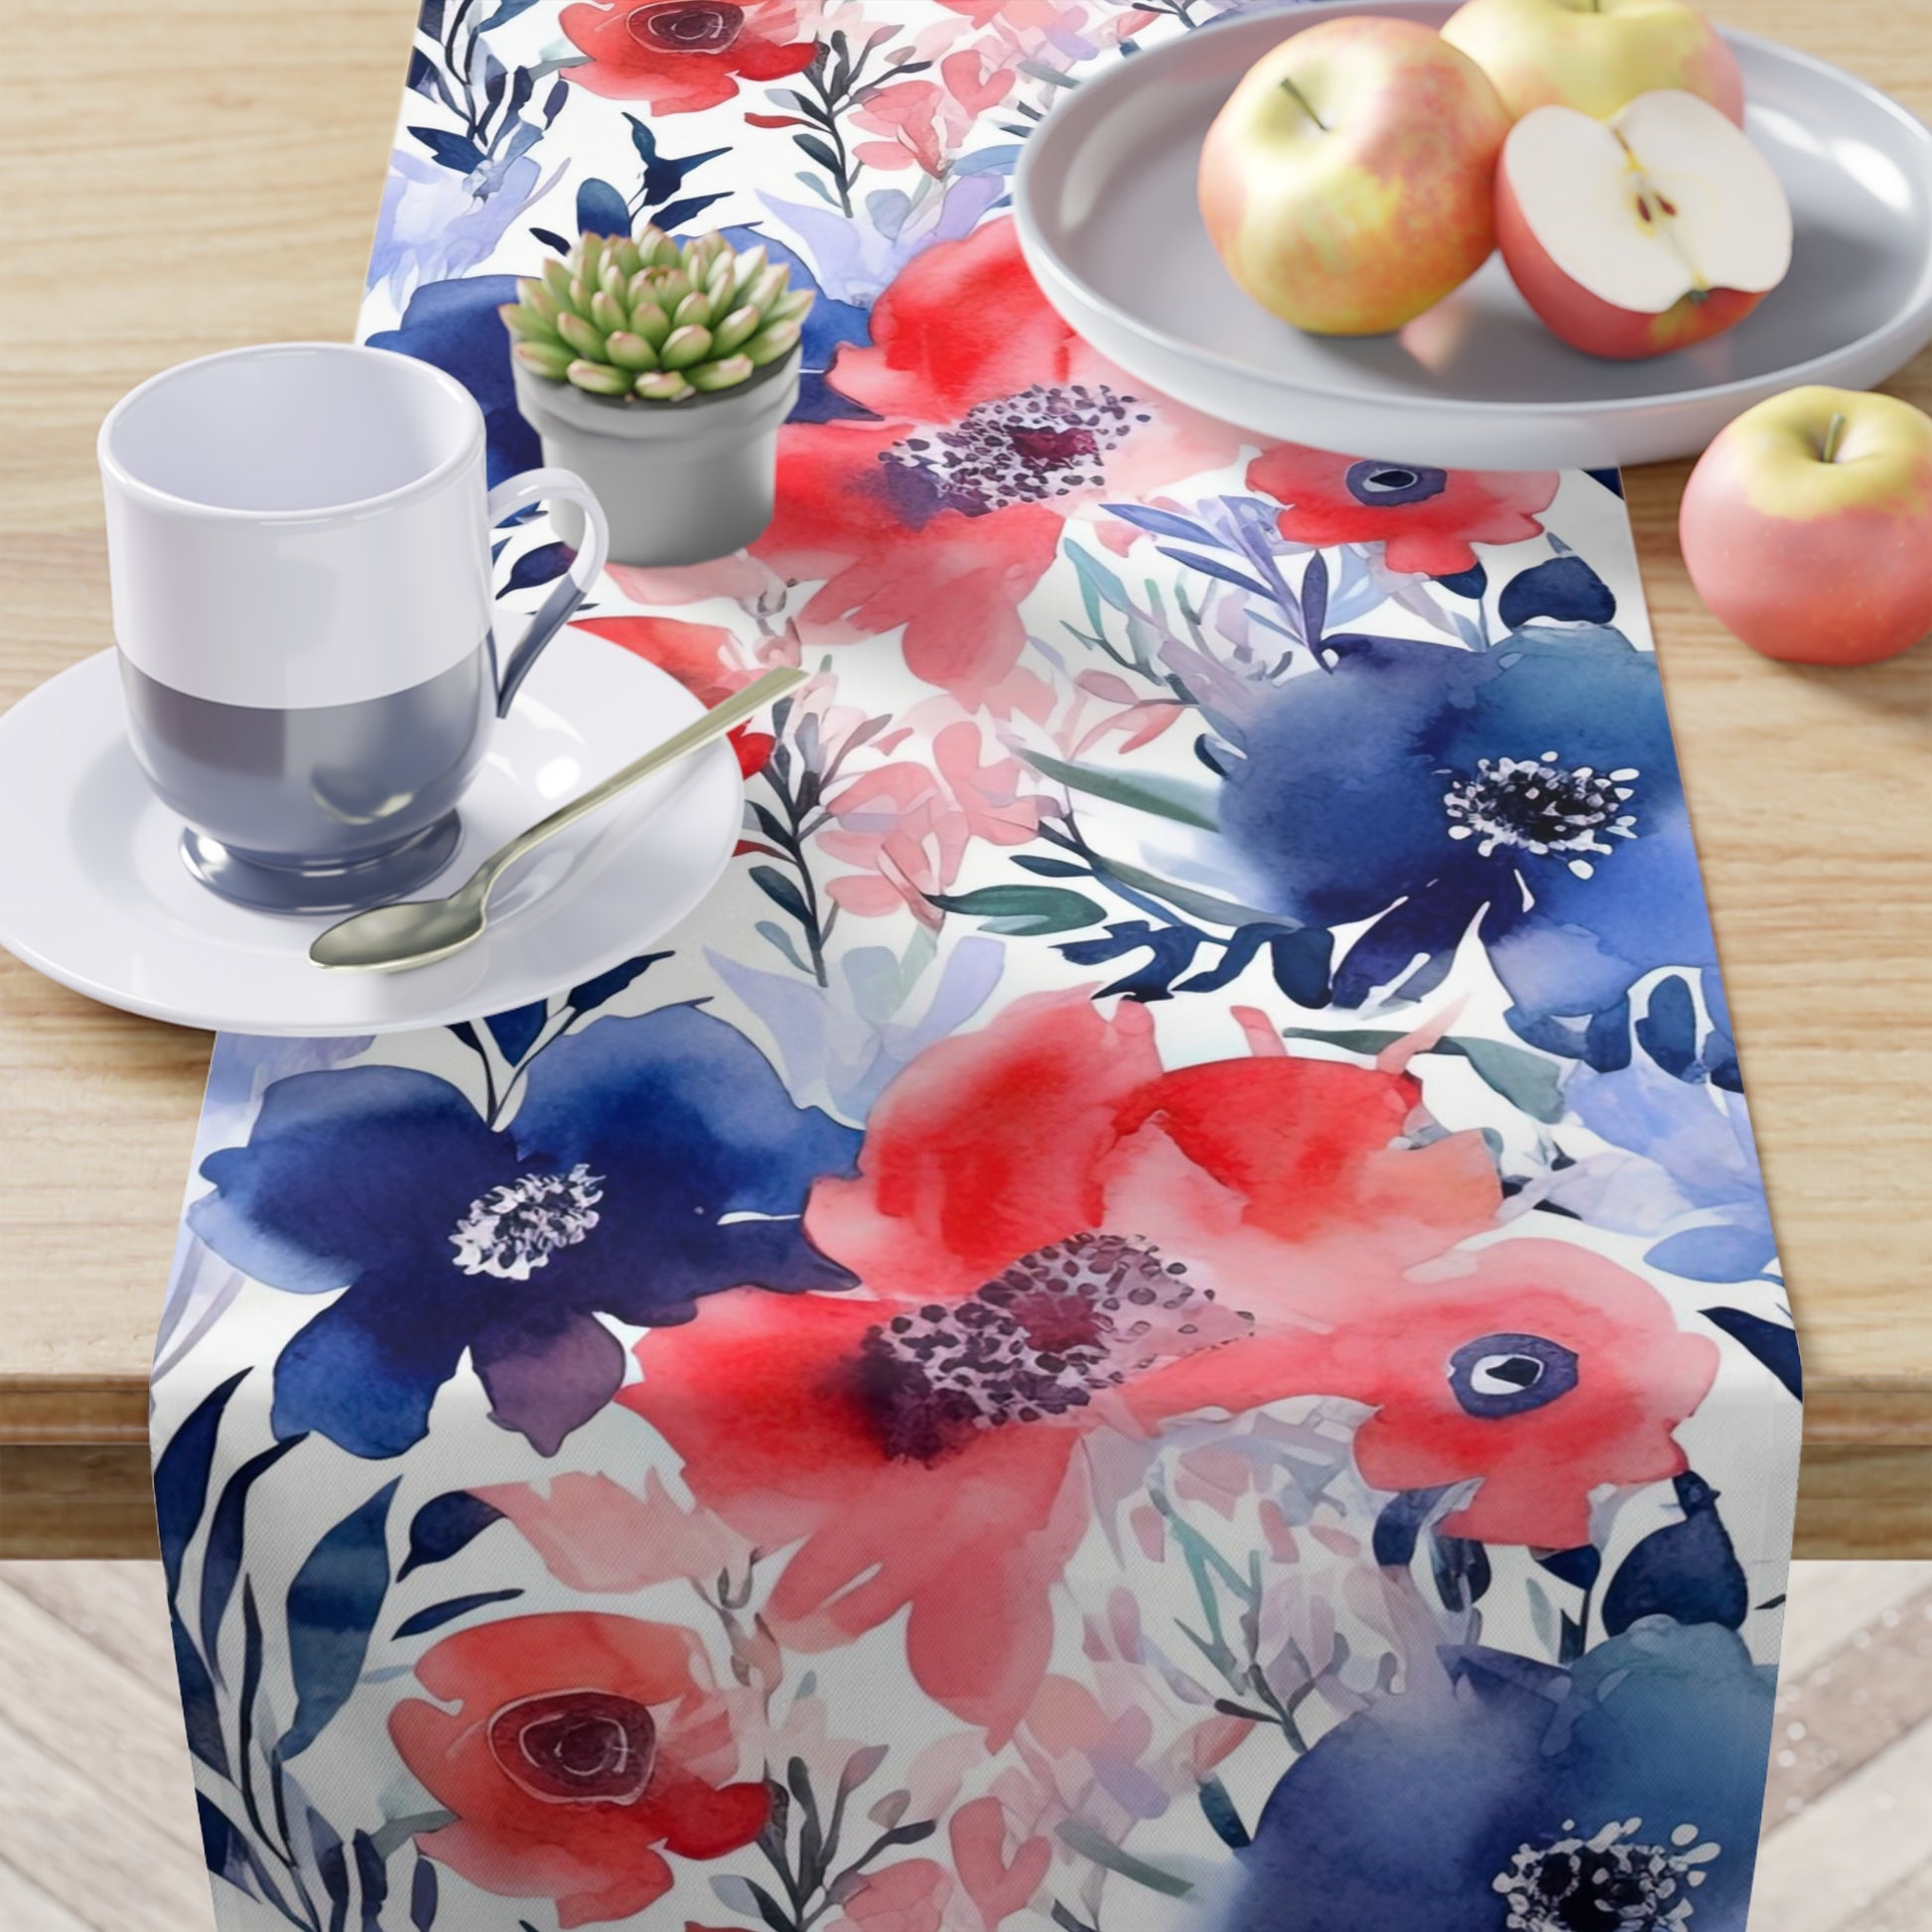 4th of july table runner with red and blue flower print